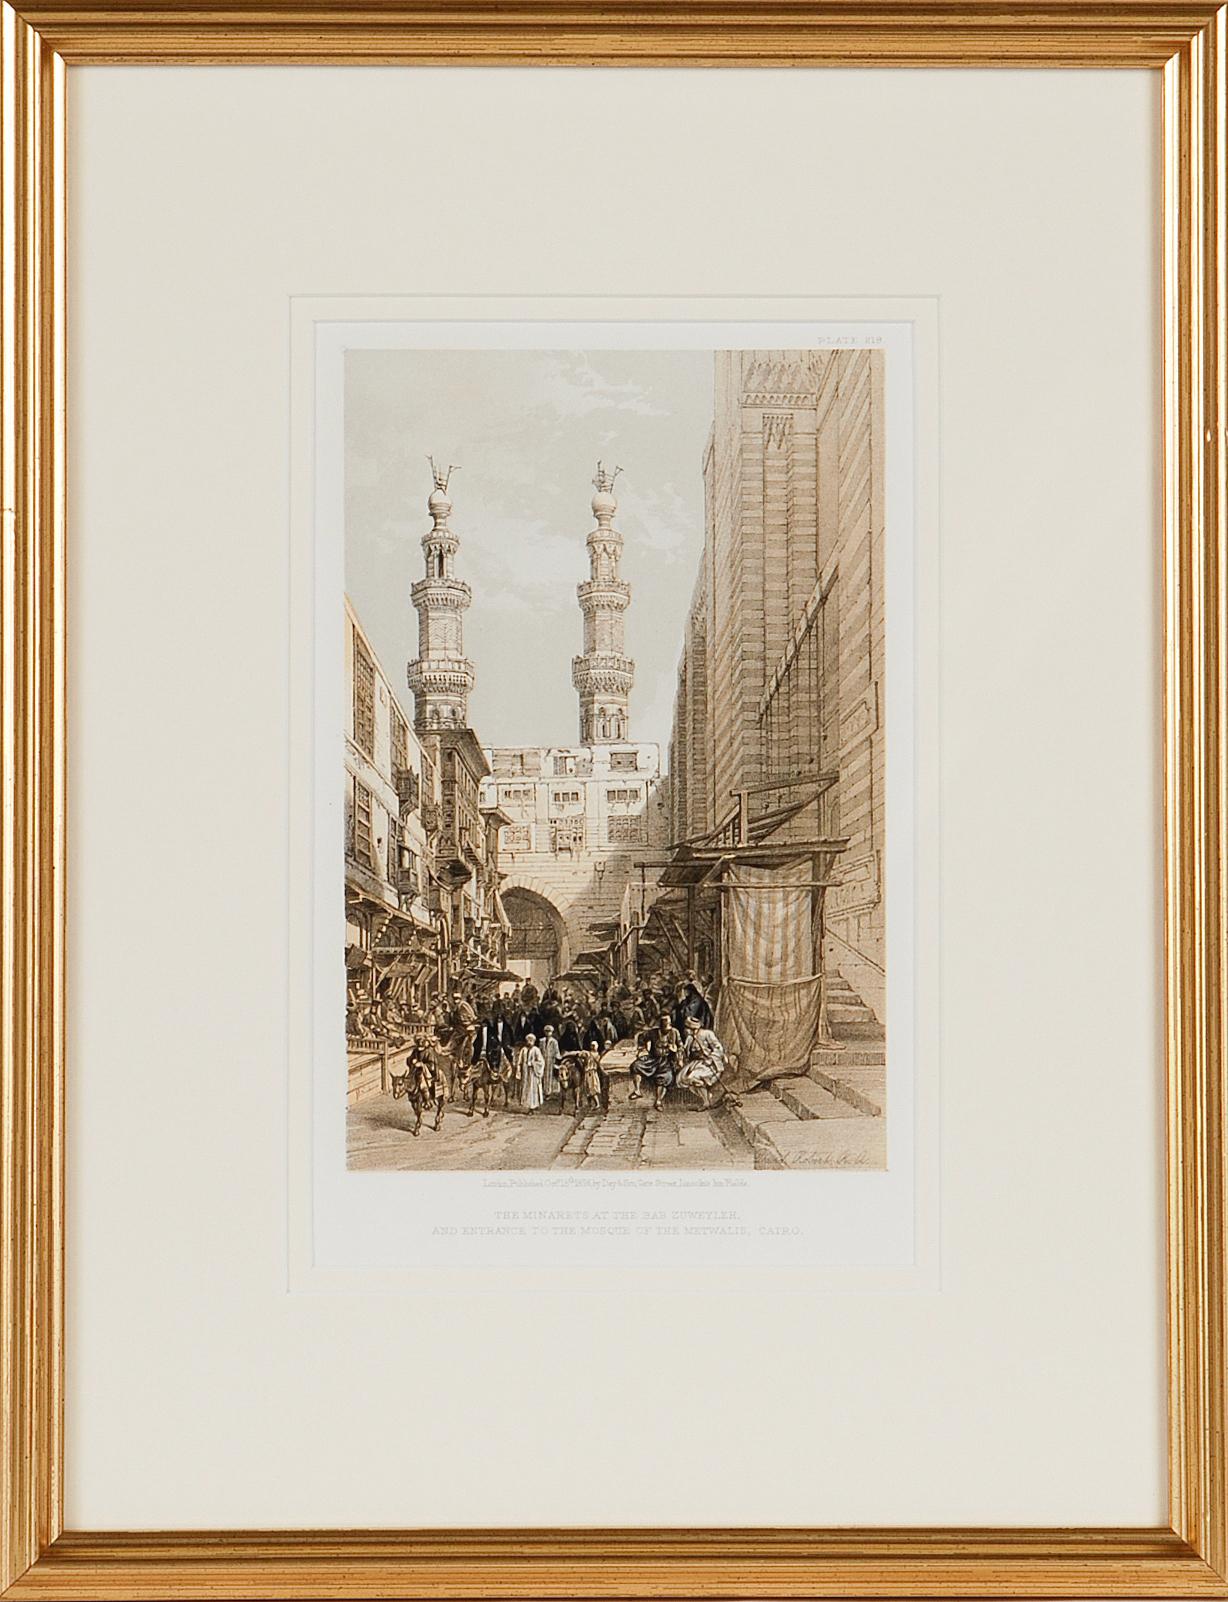 This is an original 19th century duo-tone lithograph entitled "The Minarets at the Bab Zuweyleh, and Entrance to the Mosque of the Metwalisl" by David Roberts, from his Egypt, The Holy Land and Nubia volumes of the quarto edition, published in